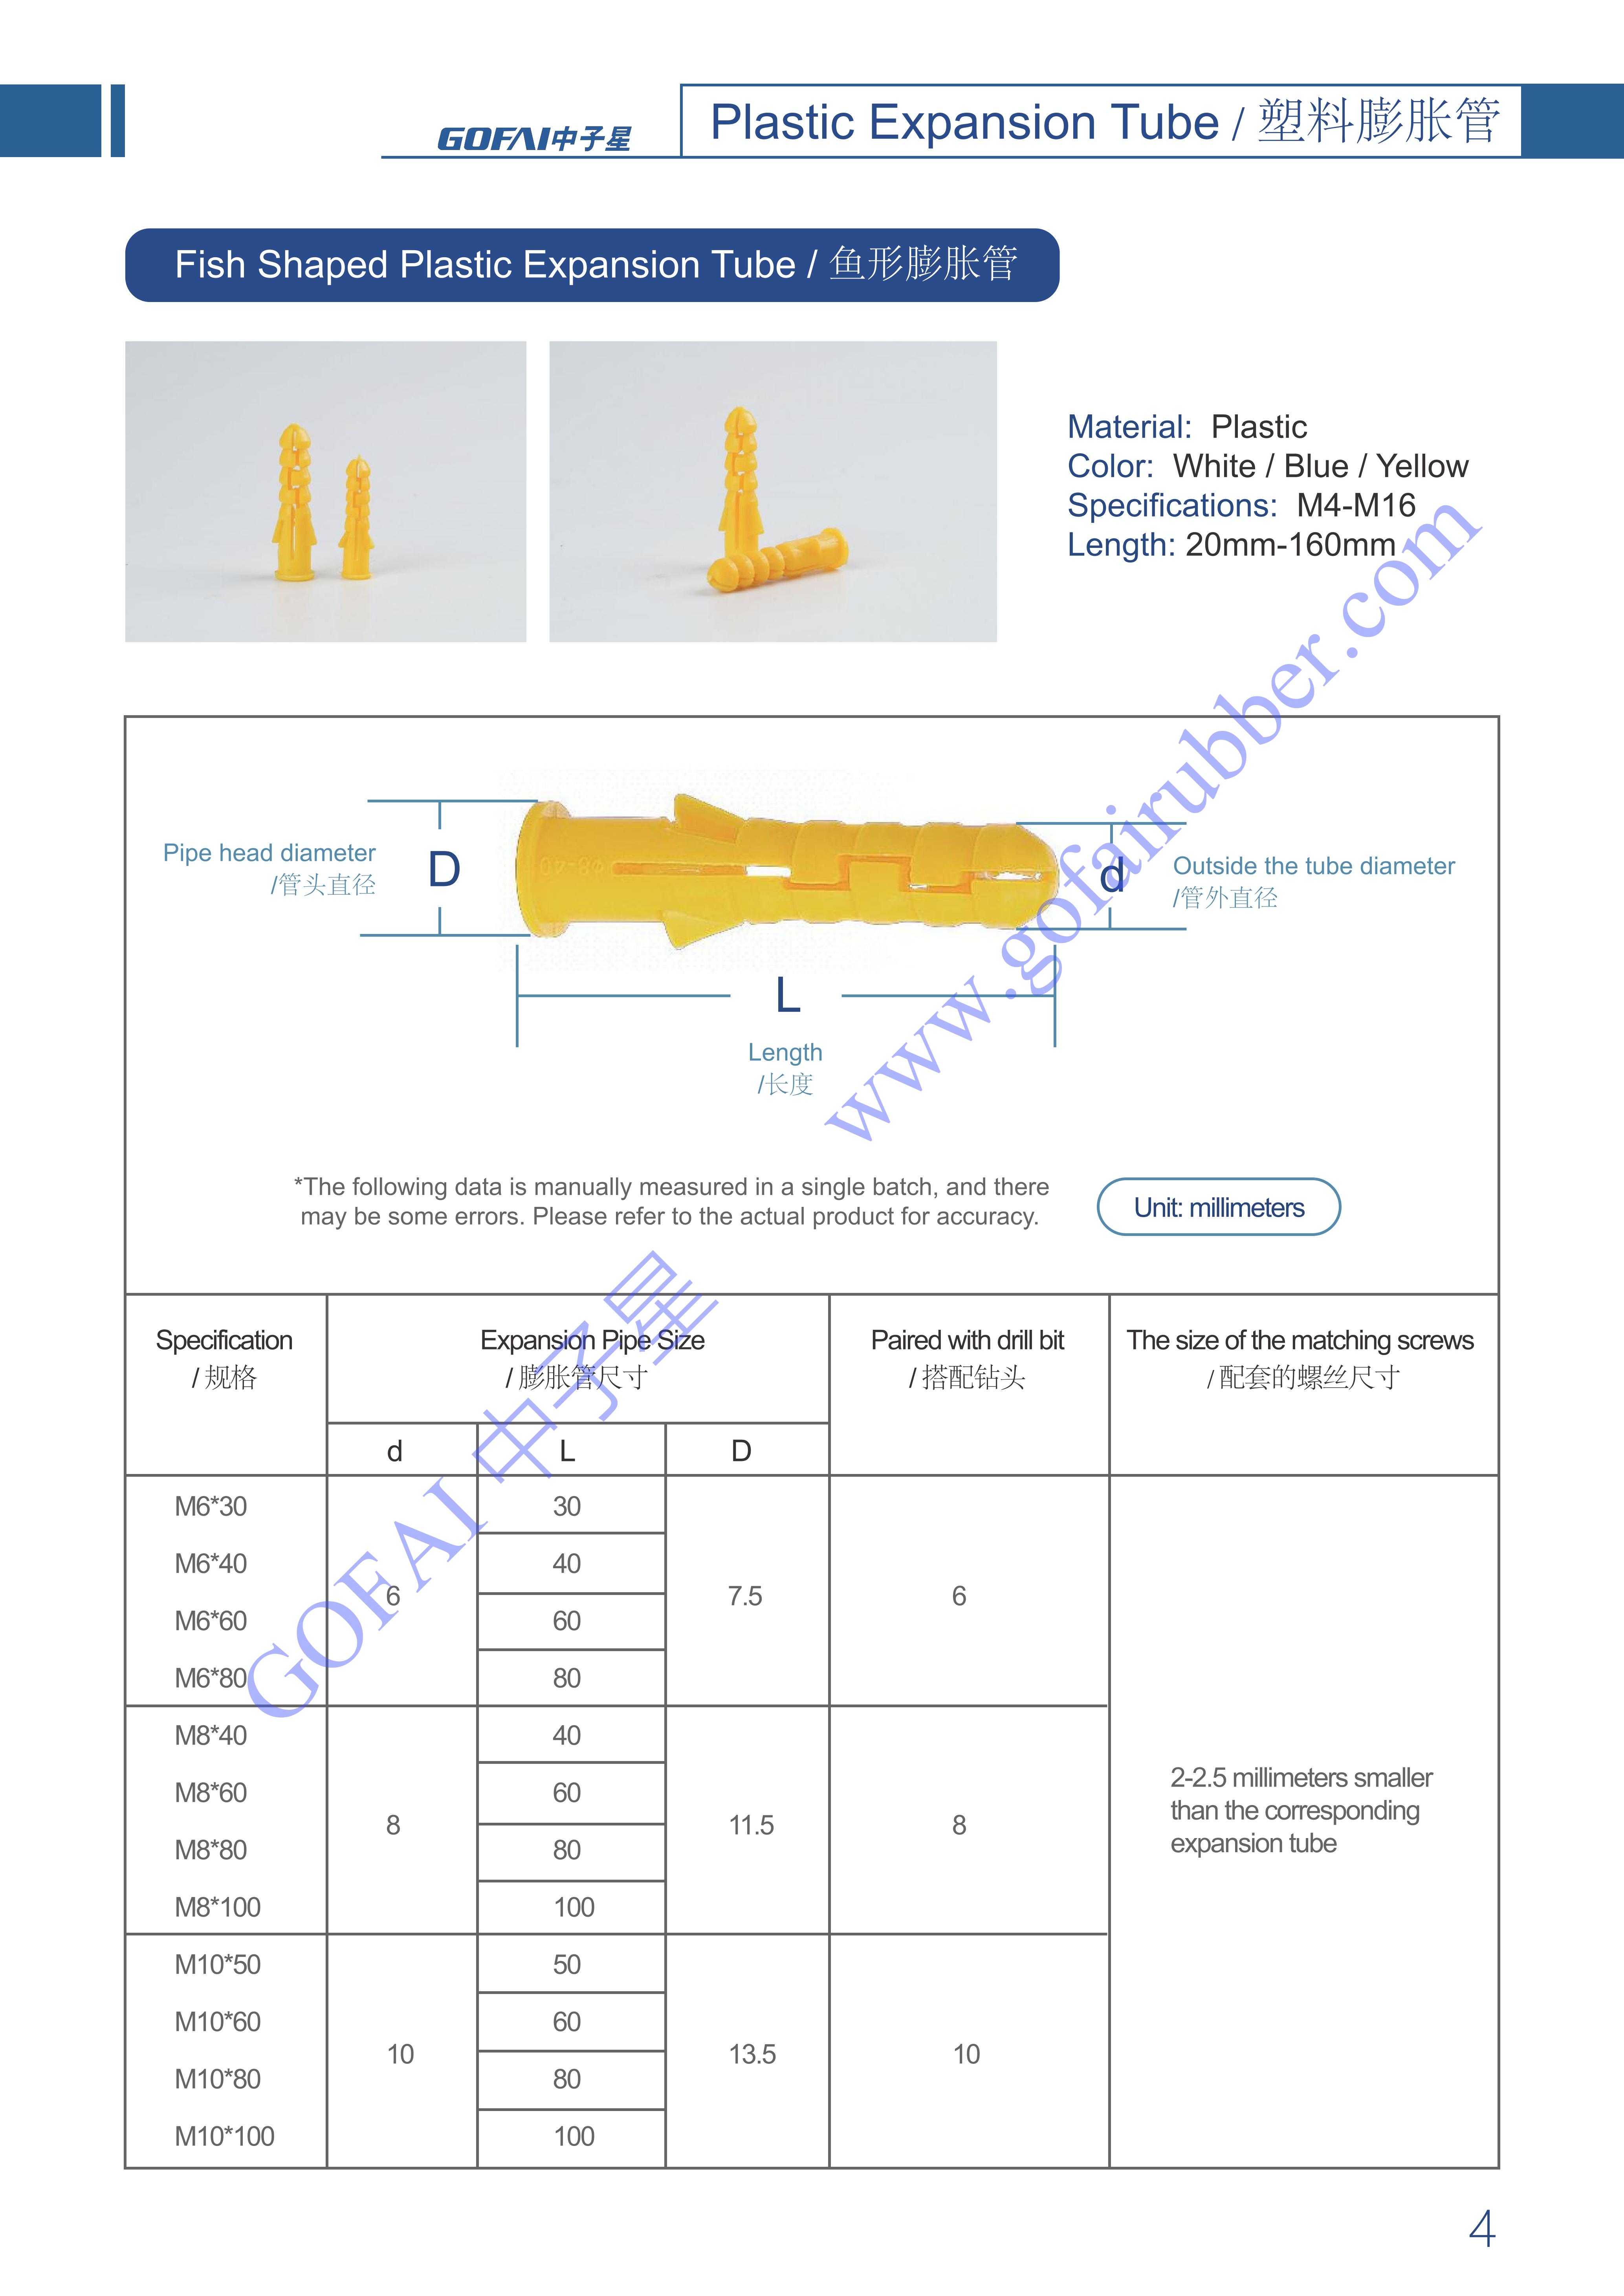 GOFAI Plastic Expansion Tube Series Products Brochure_5.jpg